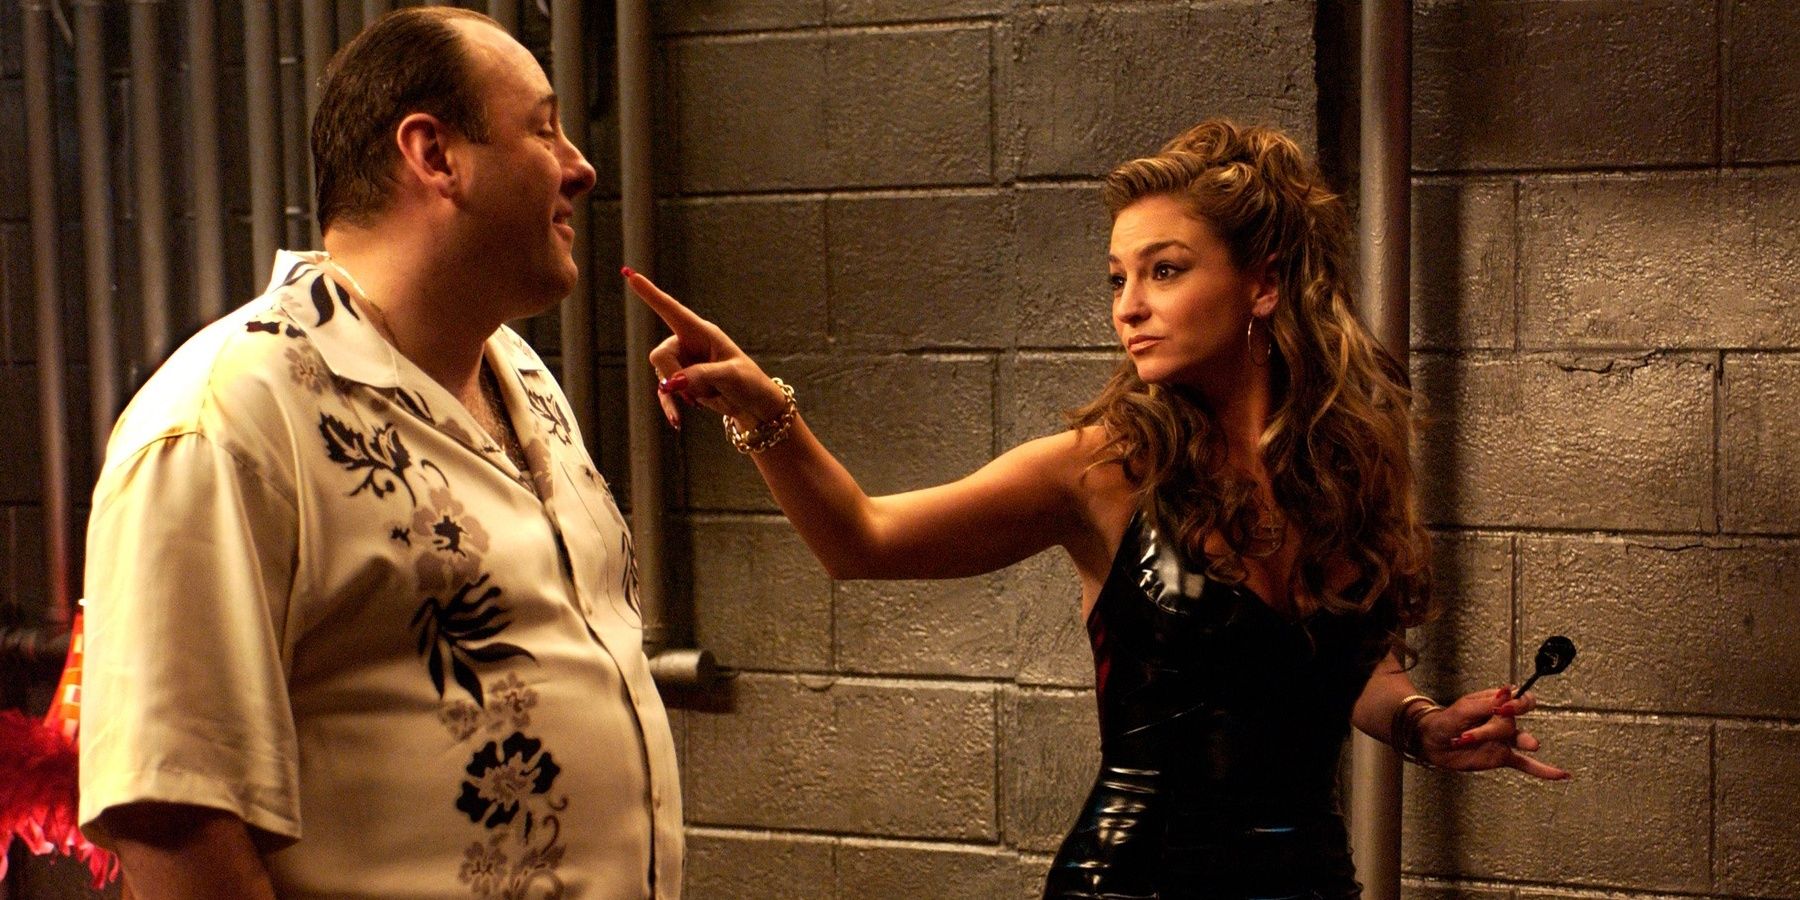 The Sopranos The 10 Best Episodes Of The Series According To IMDb